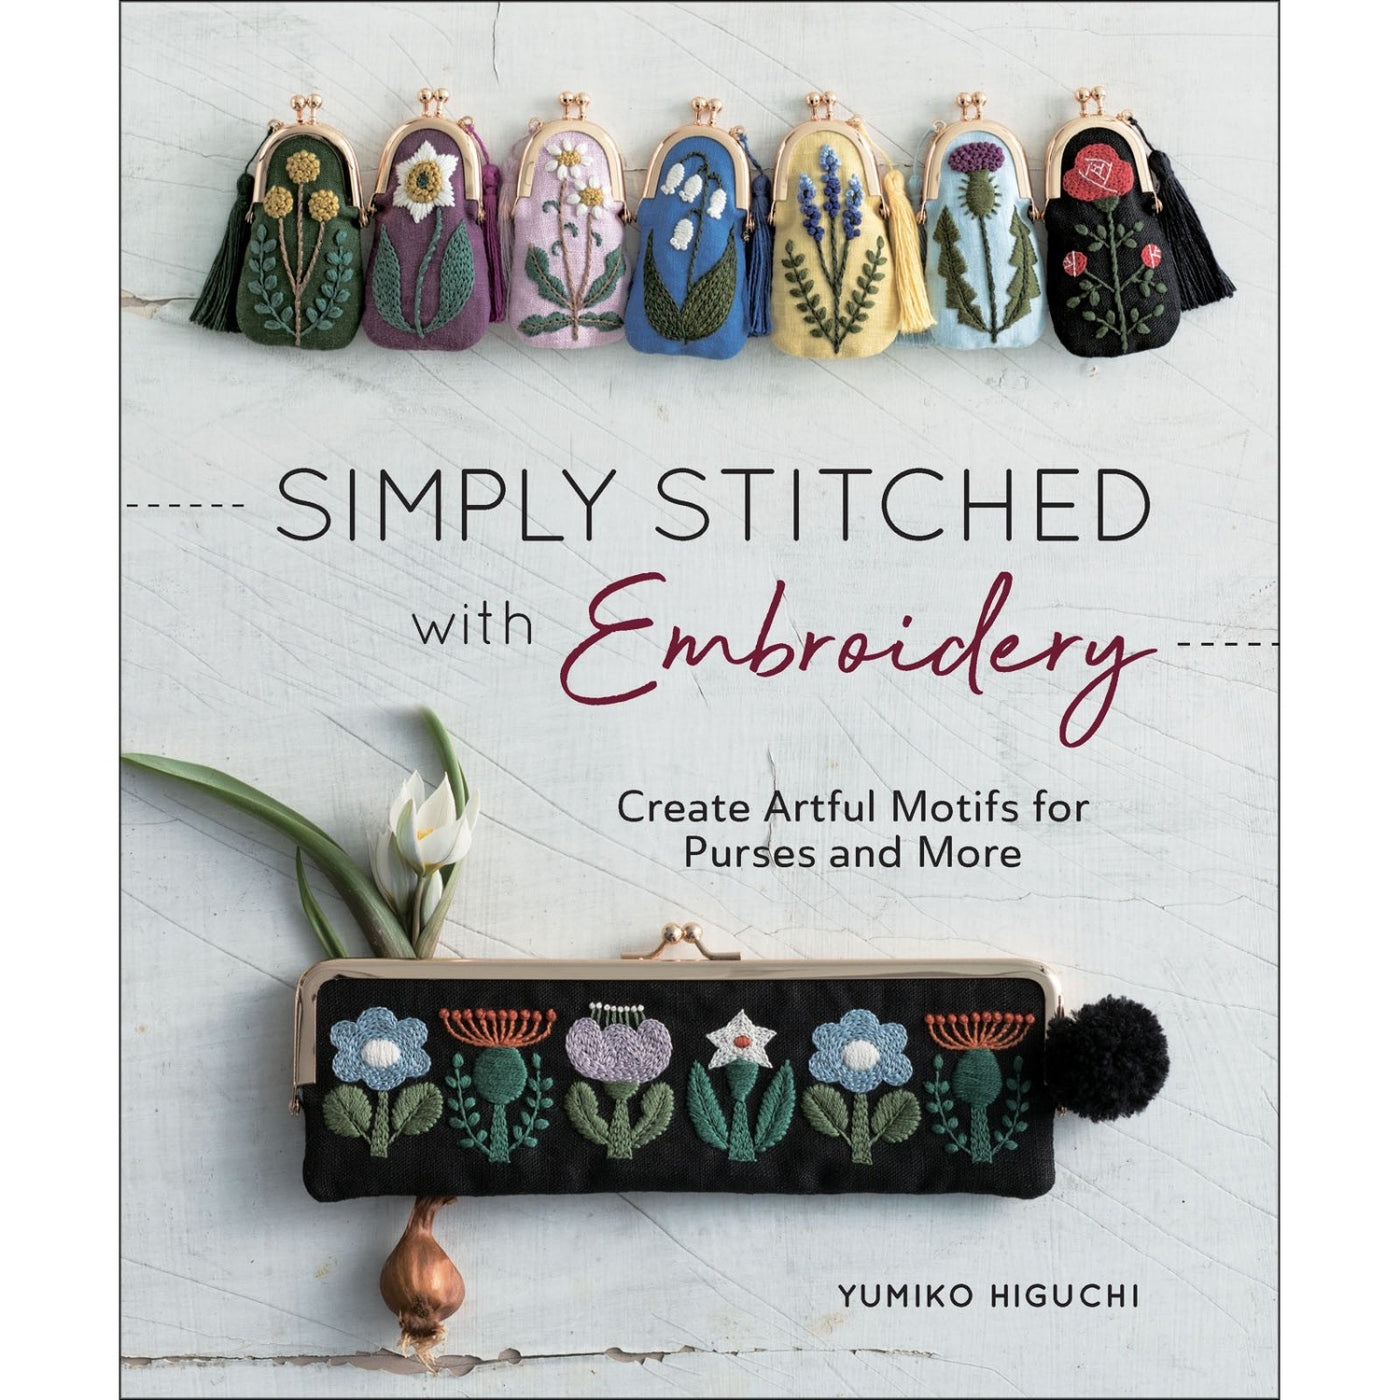 Simply Stitched with Embroidery Book by Yumiko Higuchi